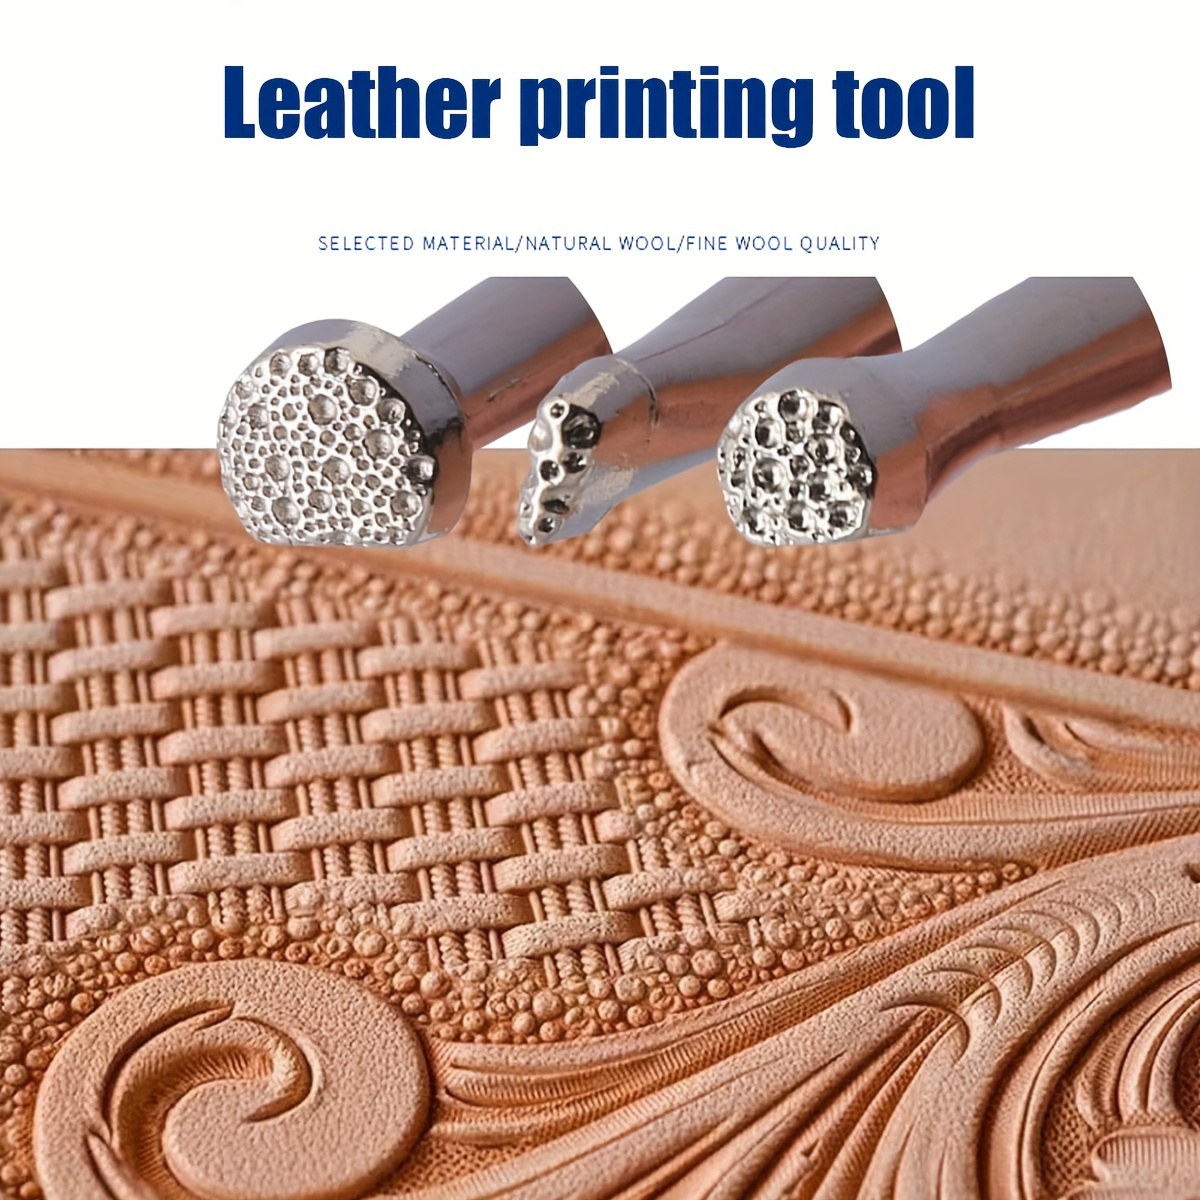 Premium Leather Stamping Tools for Professional Crafters - 20Pcs